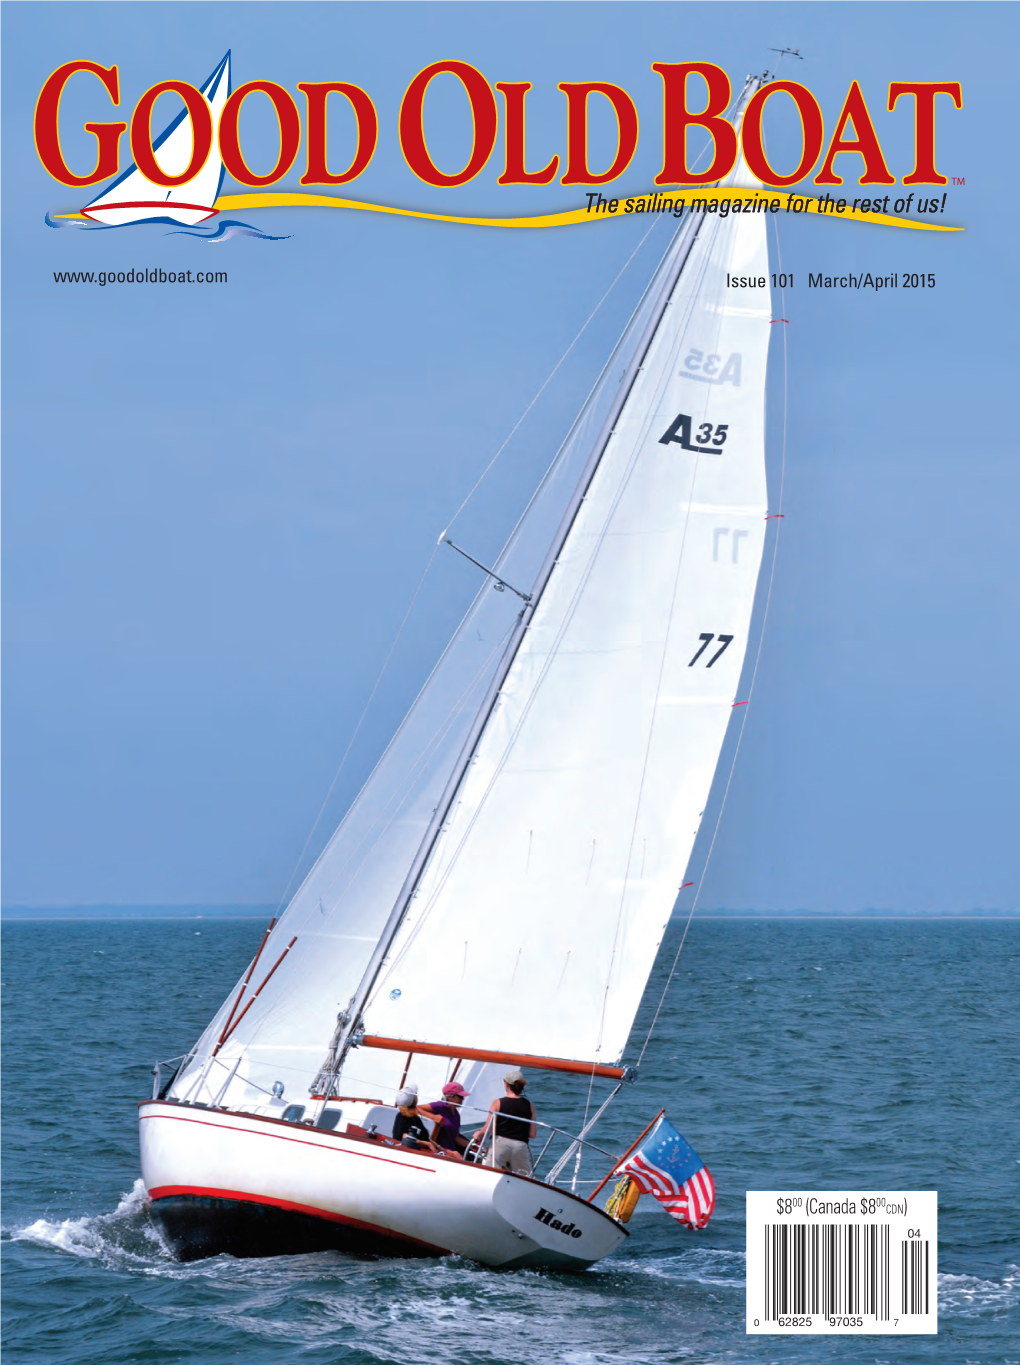 The Sailing Magazine for the Rest of Us! Issue 101 March/April 2015